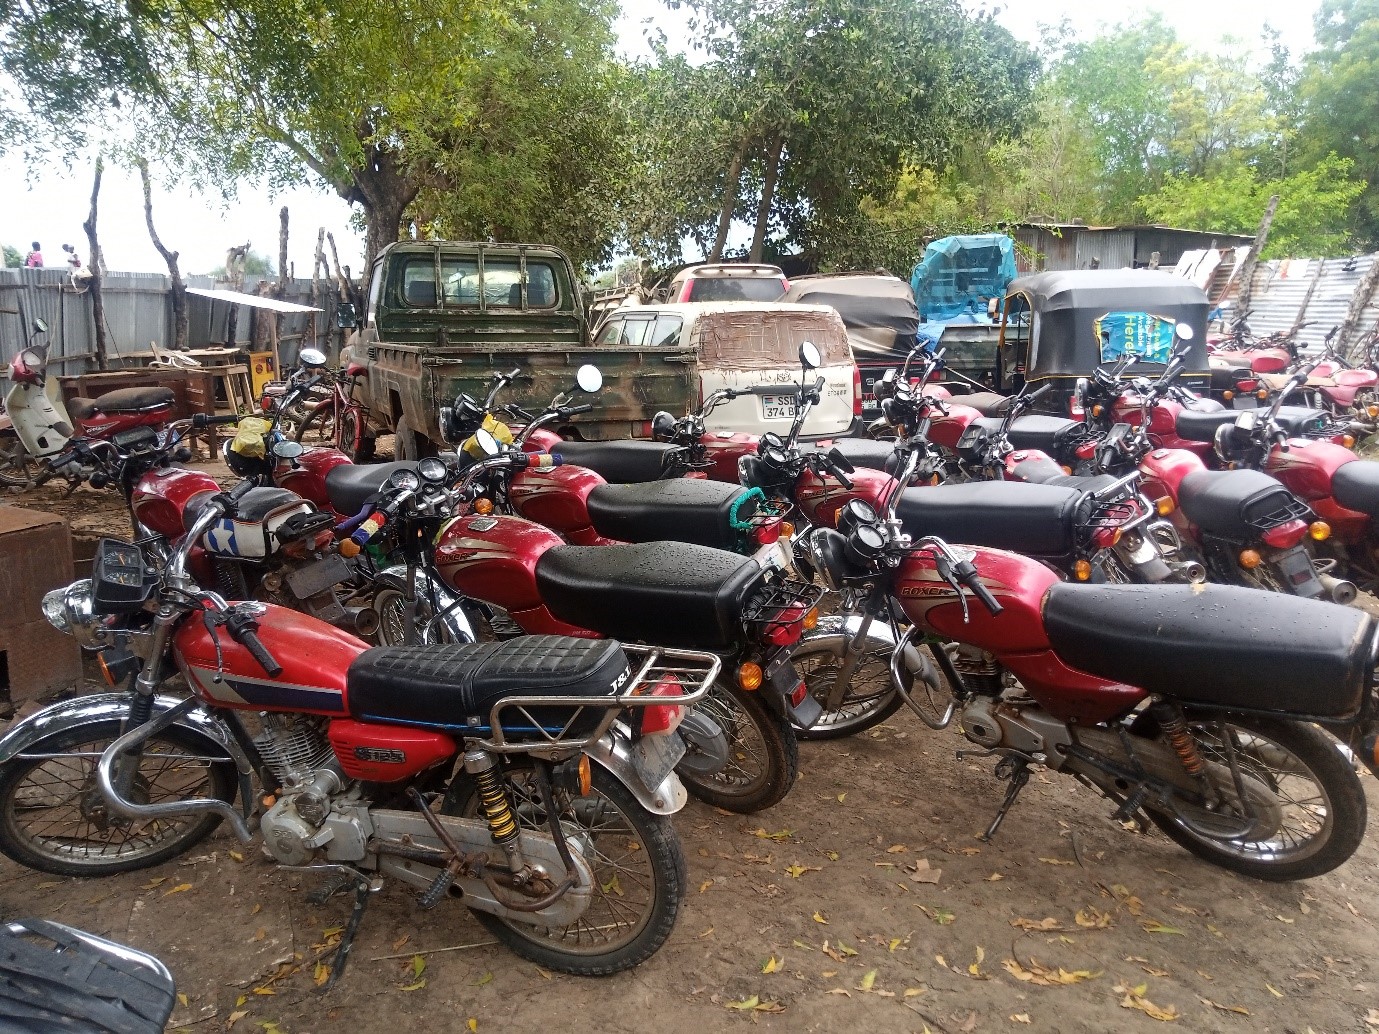 11 stolen motorcycles recovered in a police crackdown